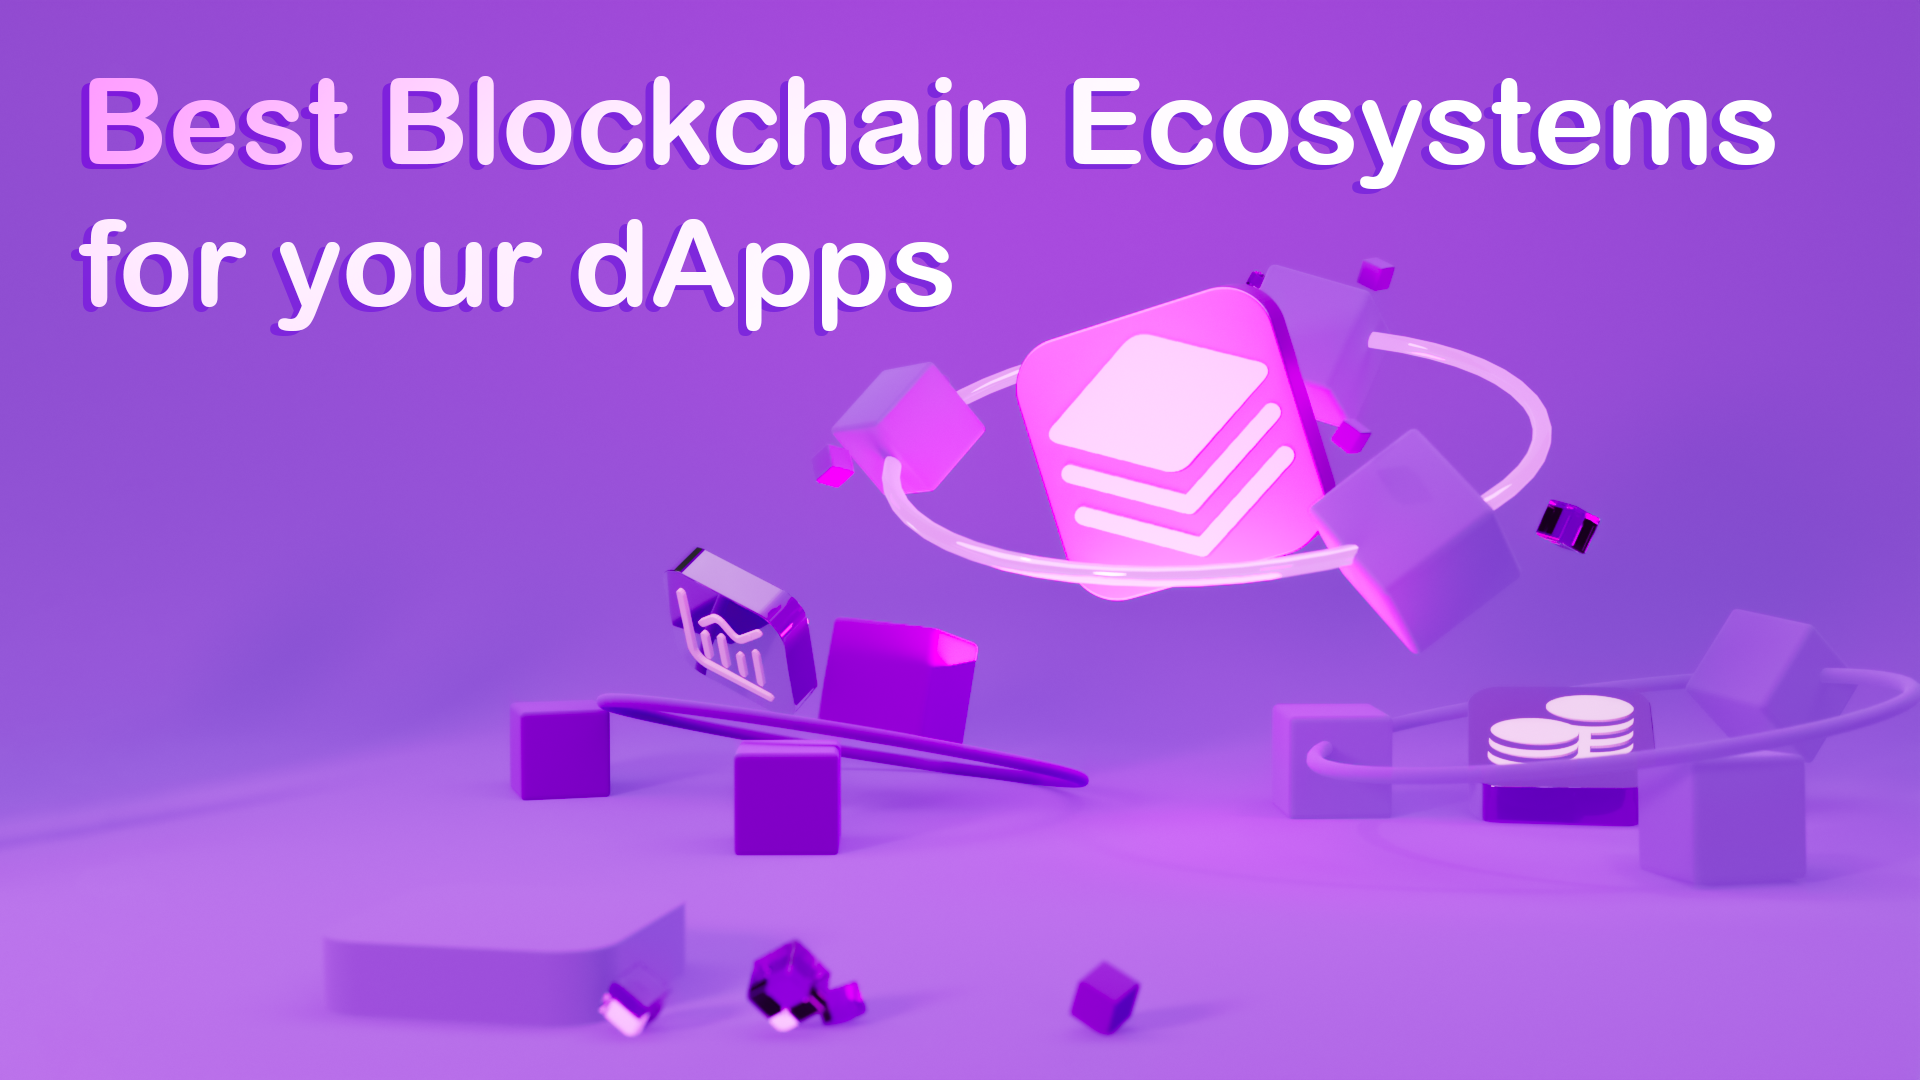 Best Blockchain Ecosystems for Your dApps